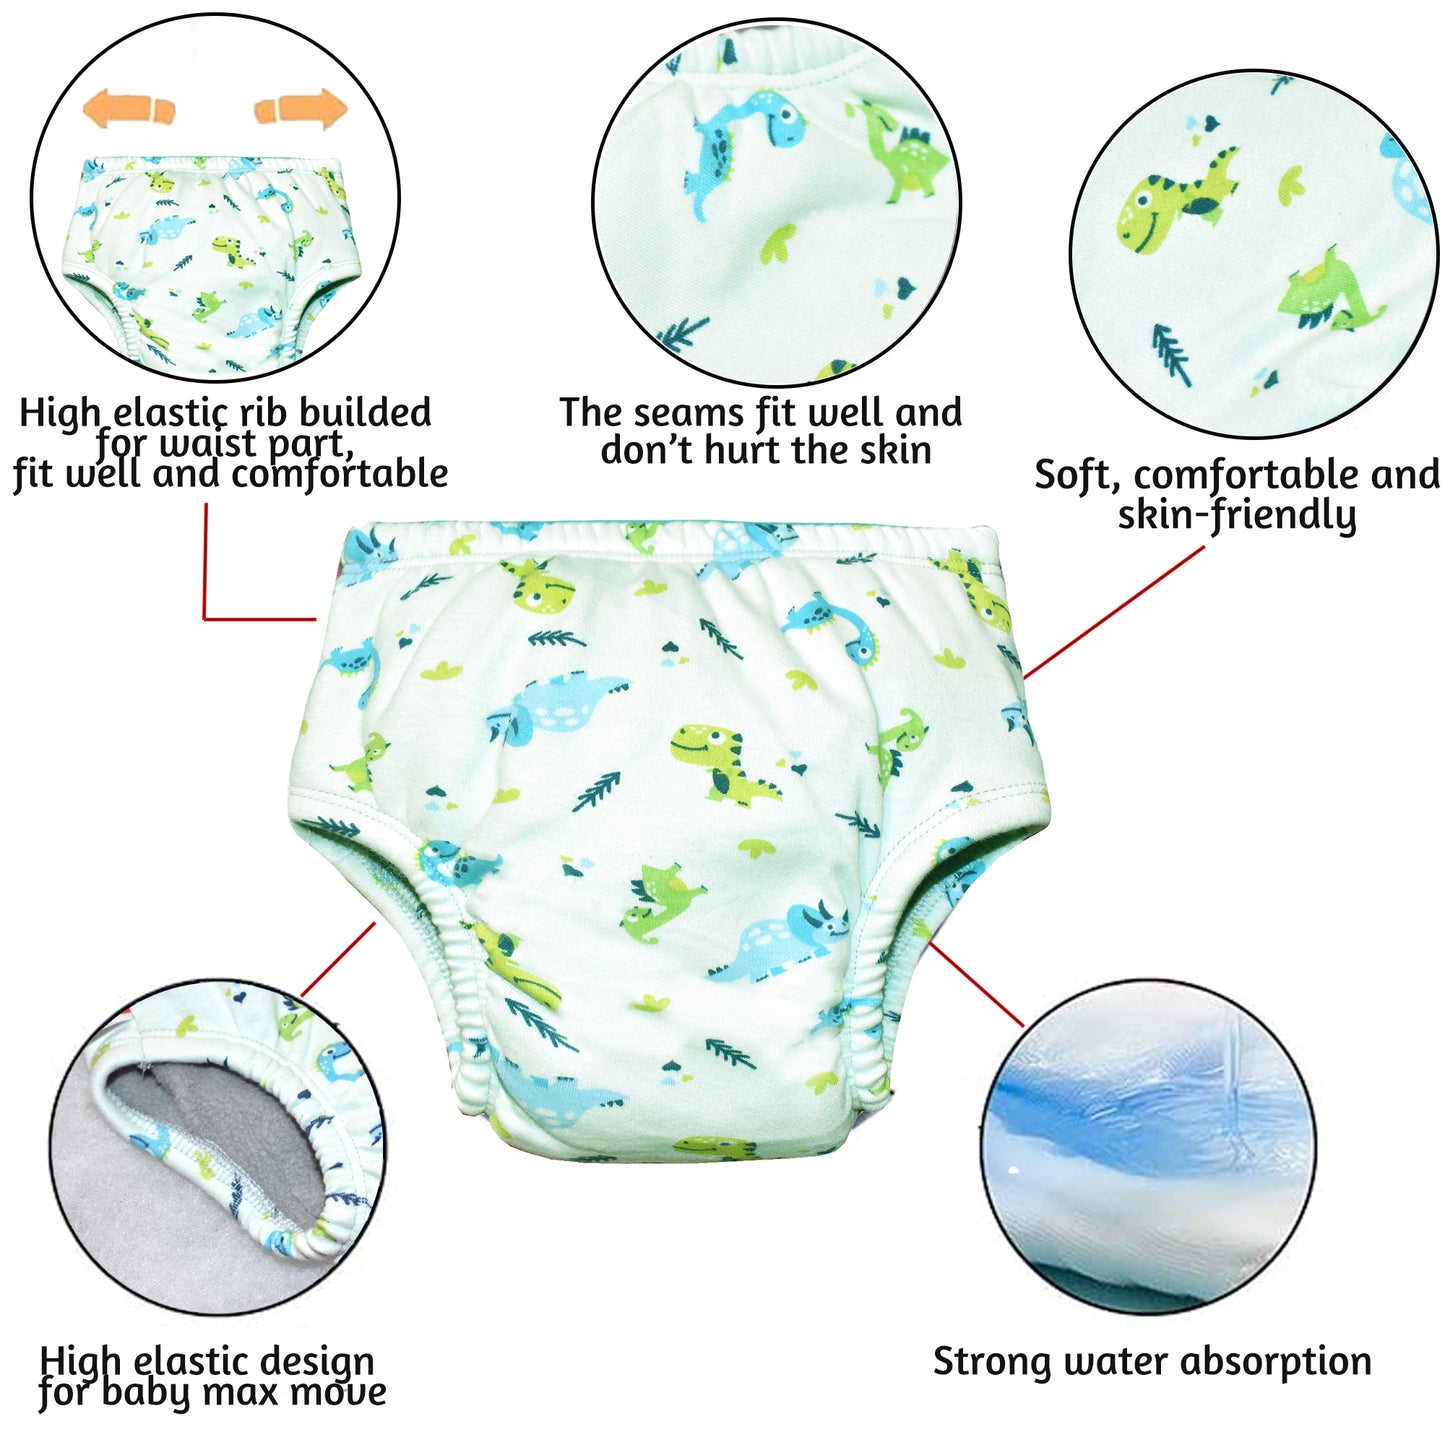 VParents Padded Underwear for Babies and Toddlers with 3 Layers of Cotton Padding Potty Training  Pull Up & Diaper-Free Time (PRINTS MAY VARY)